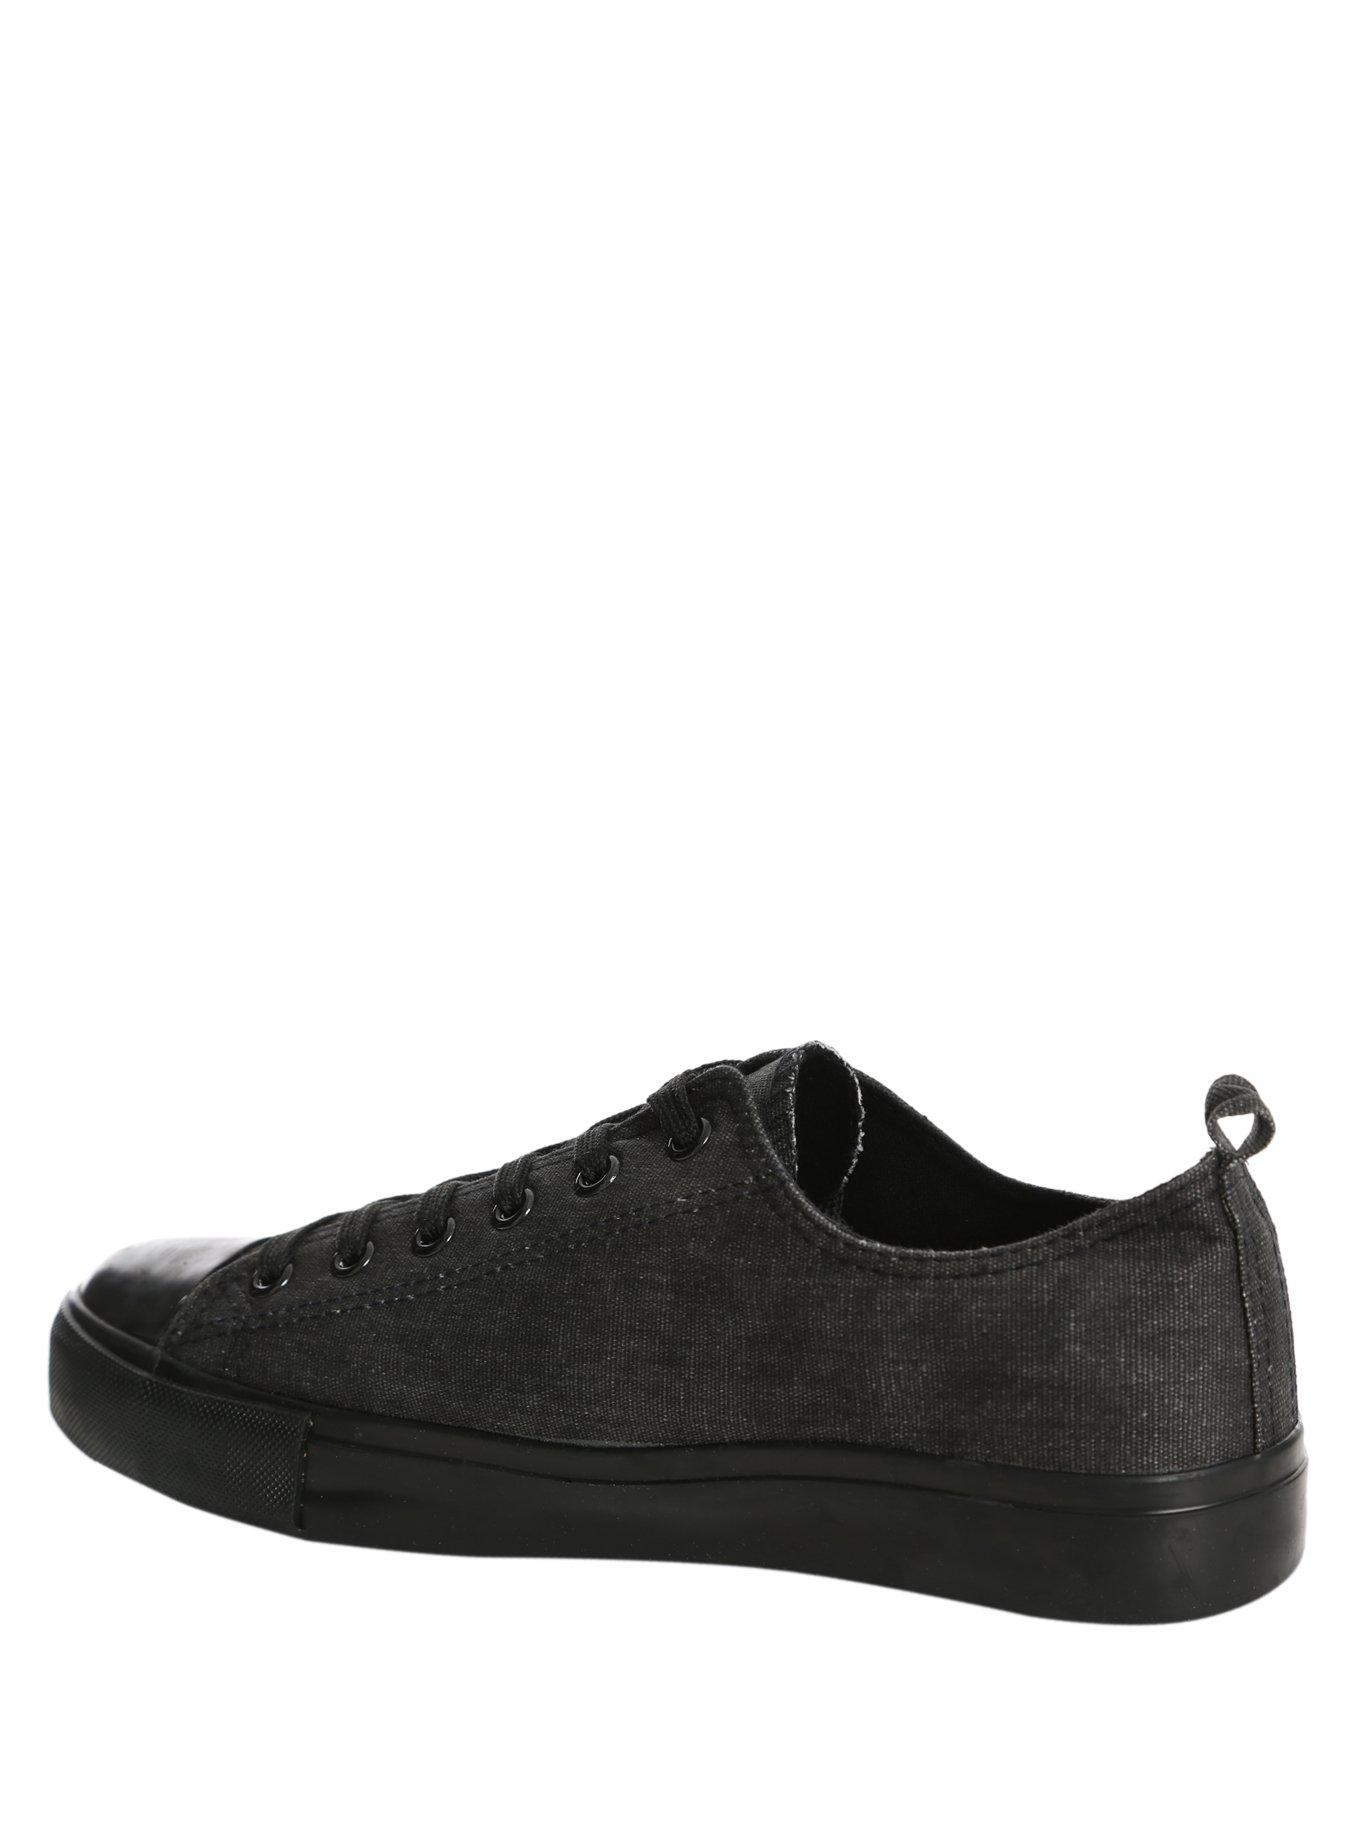 Grey Lace-Up Sneakers, , alternate